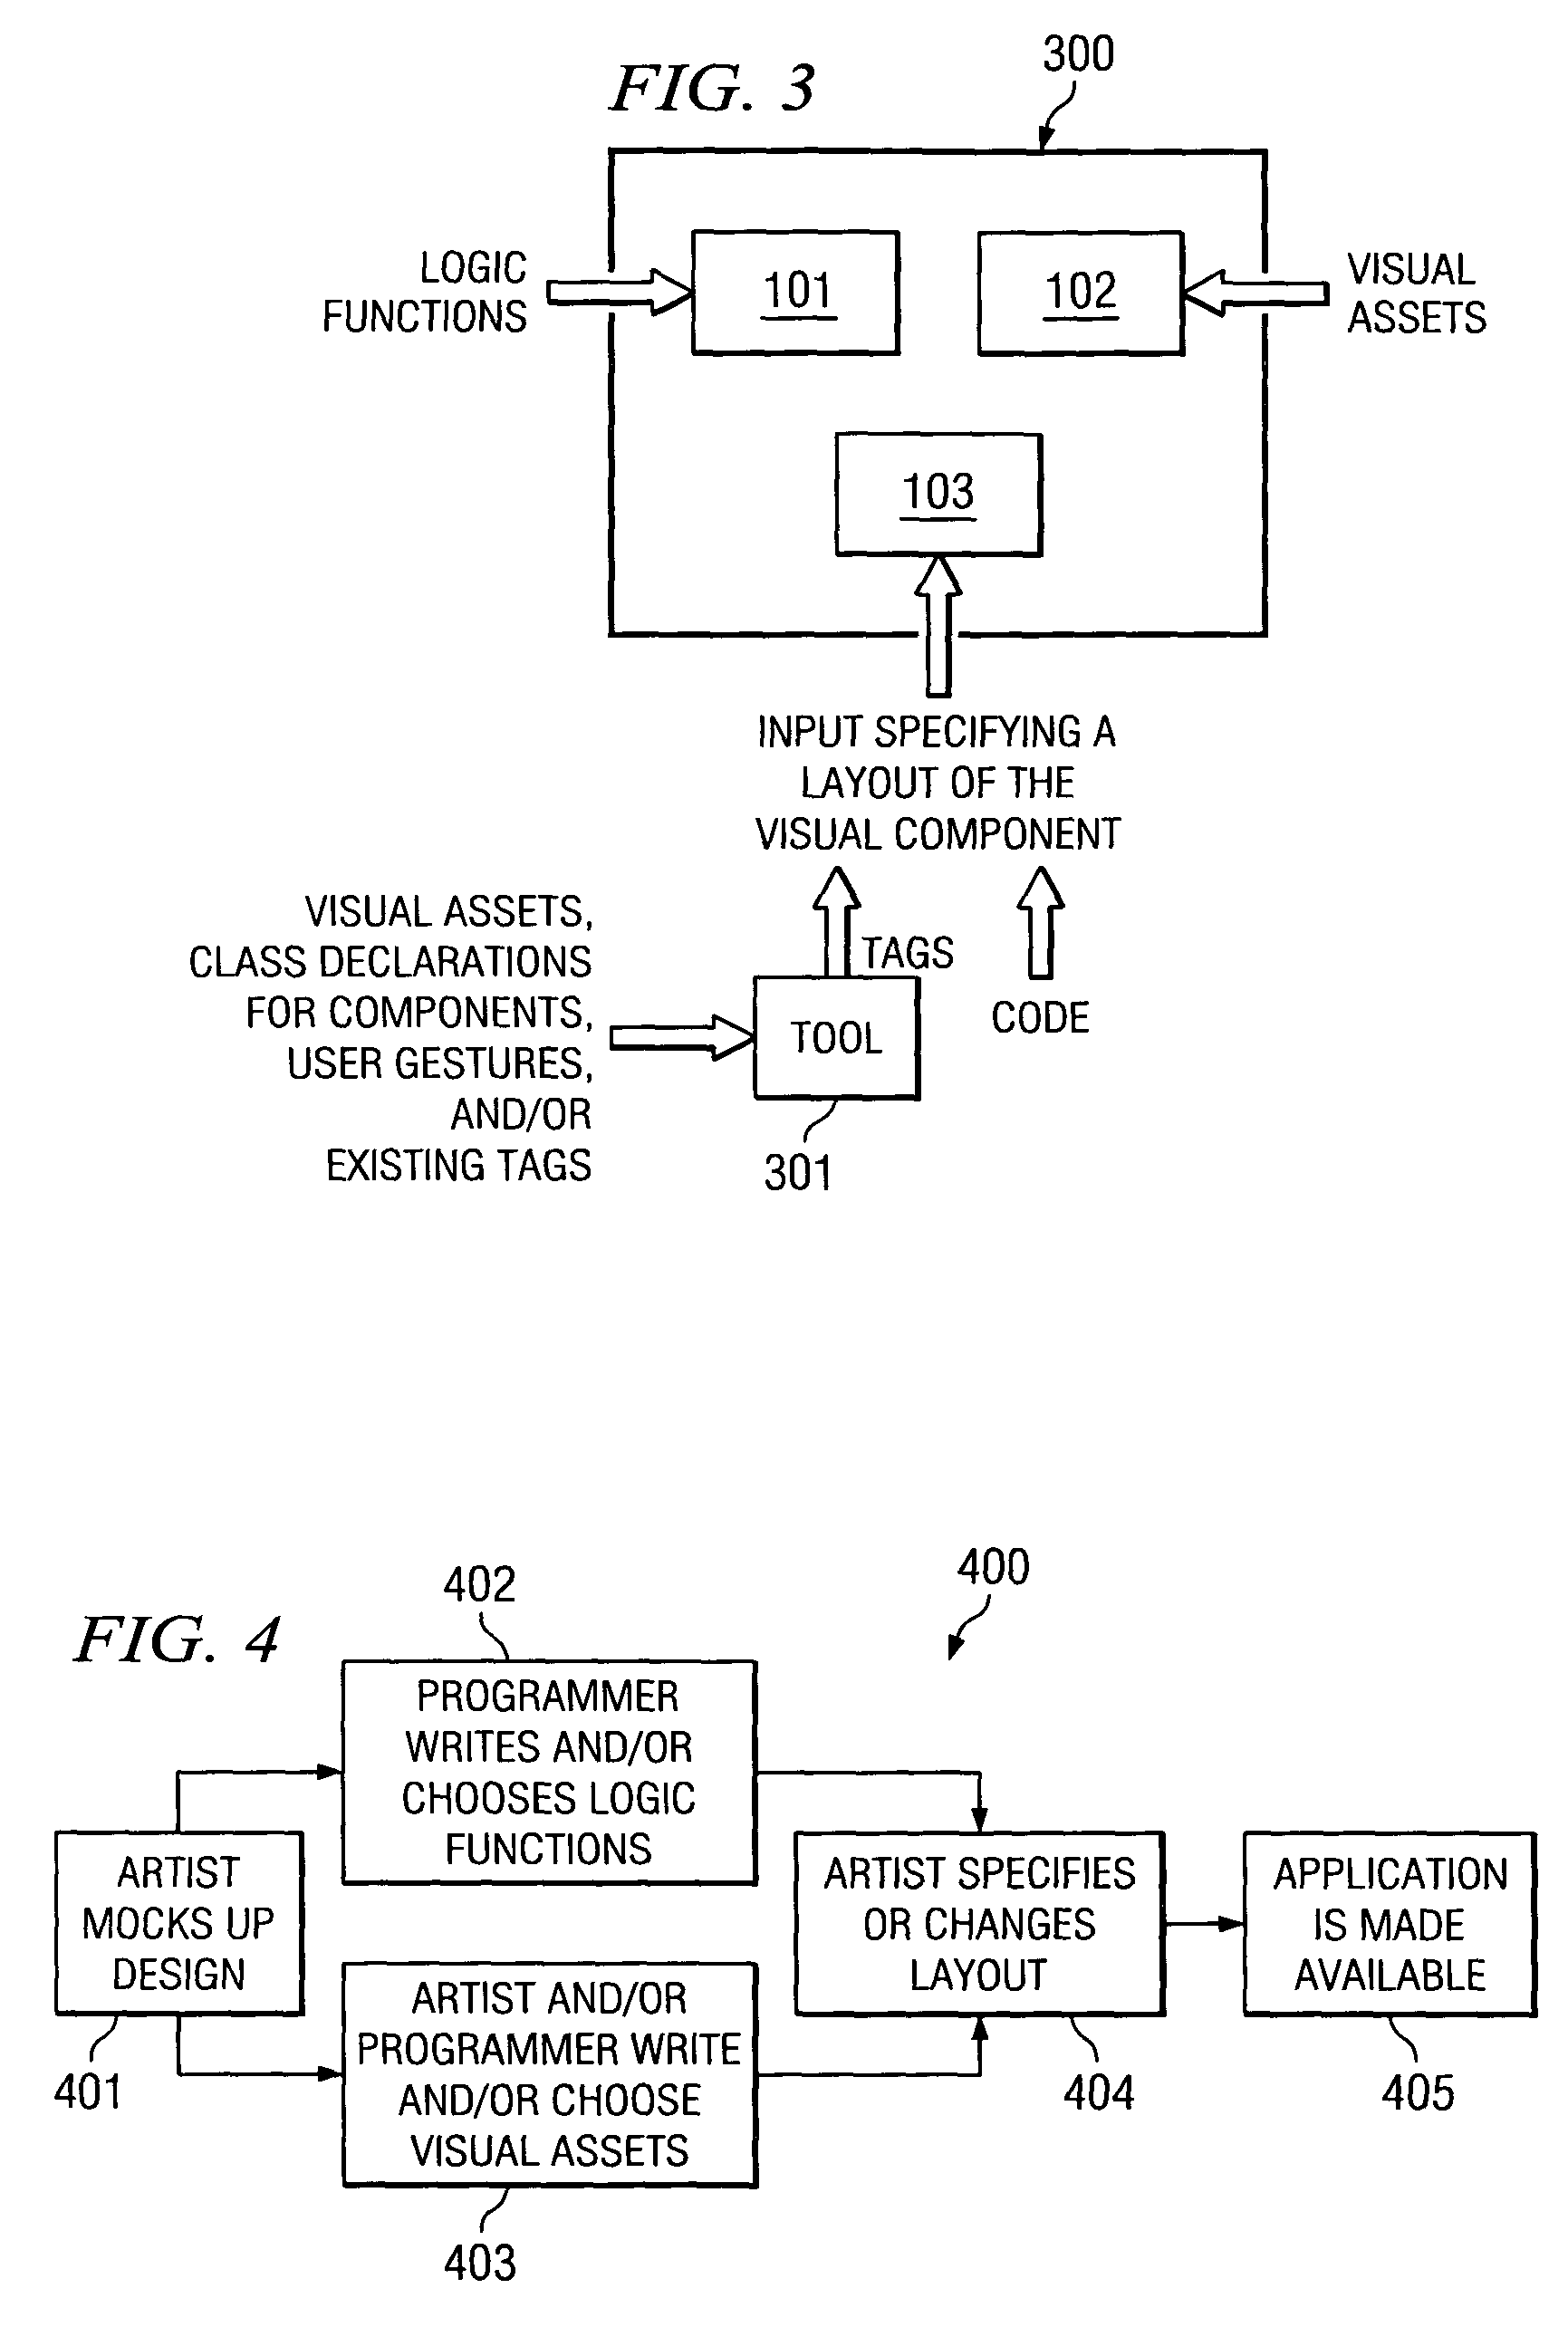 System and method for providing visual component layout input in alternate forms